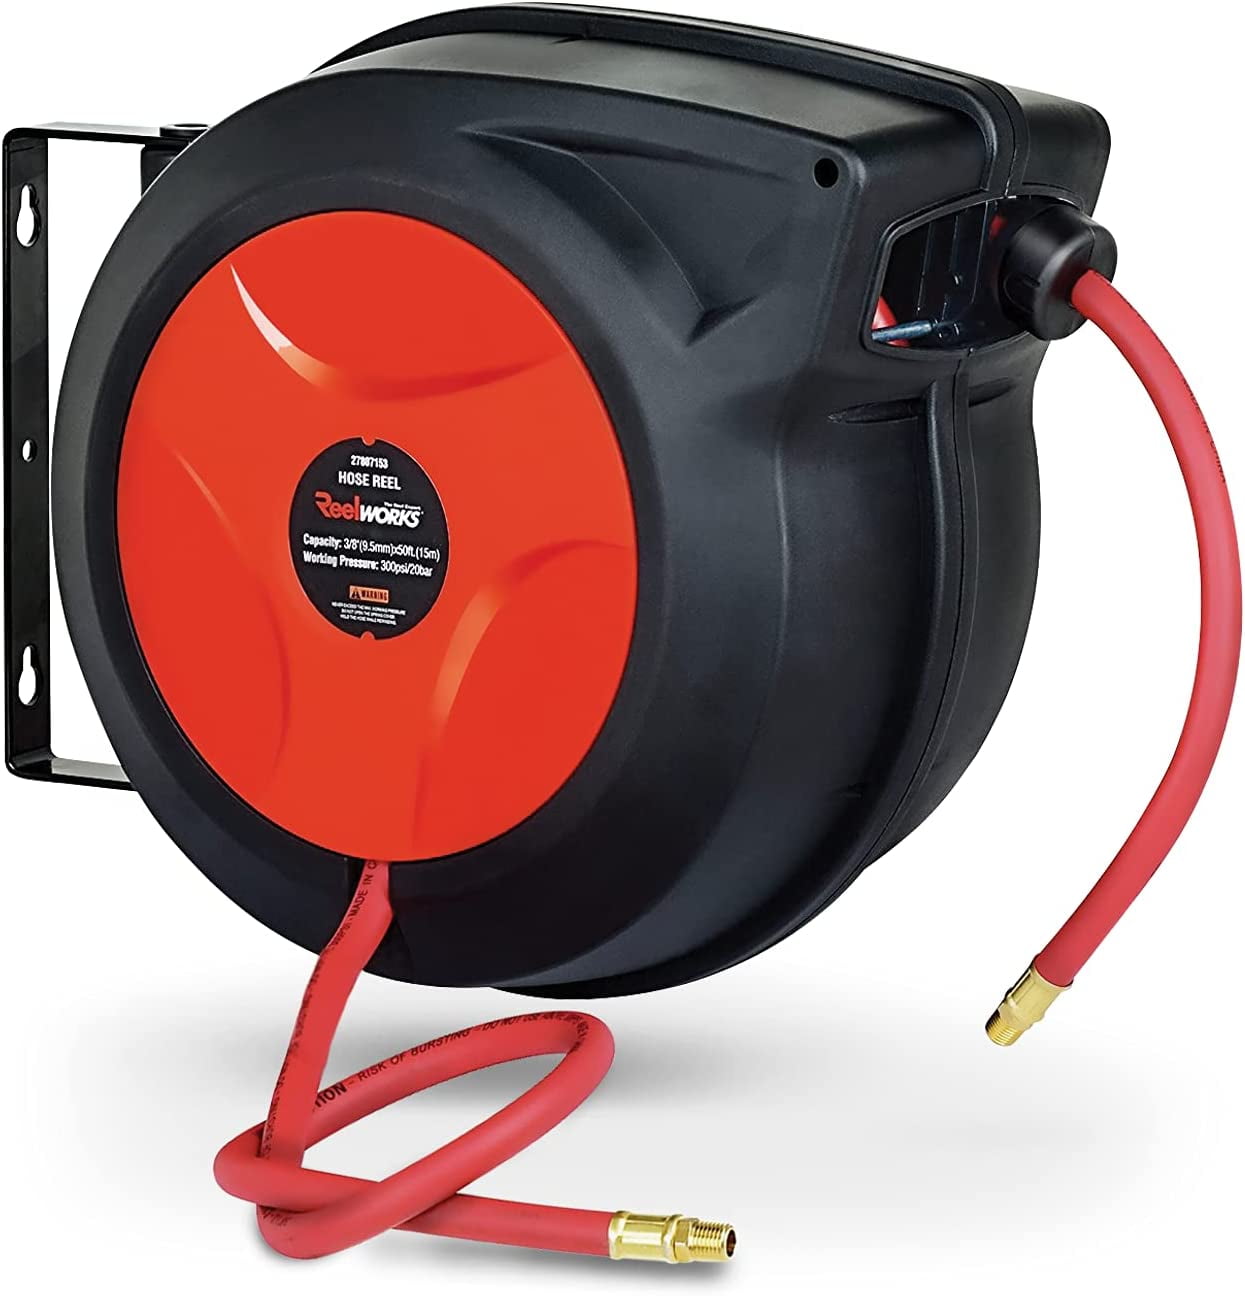 ReelWorks Air Hose Reel - Retractable 3/8 x 50' with 3' Lead-In